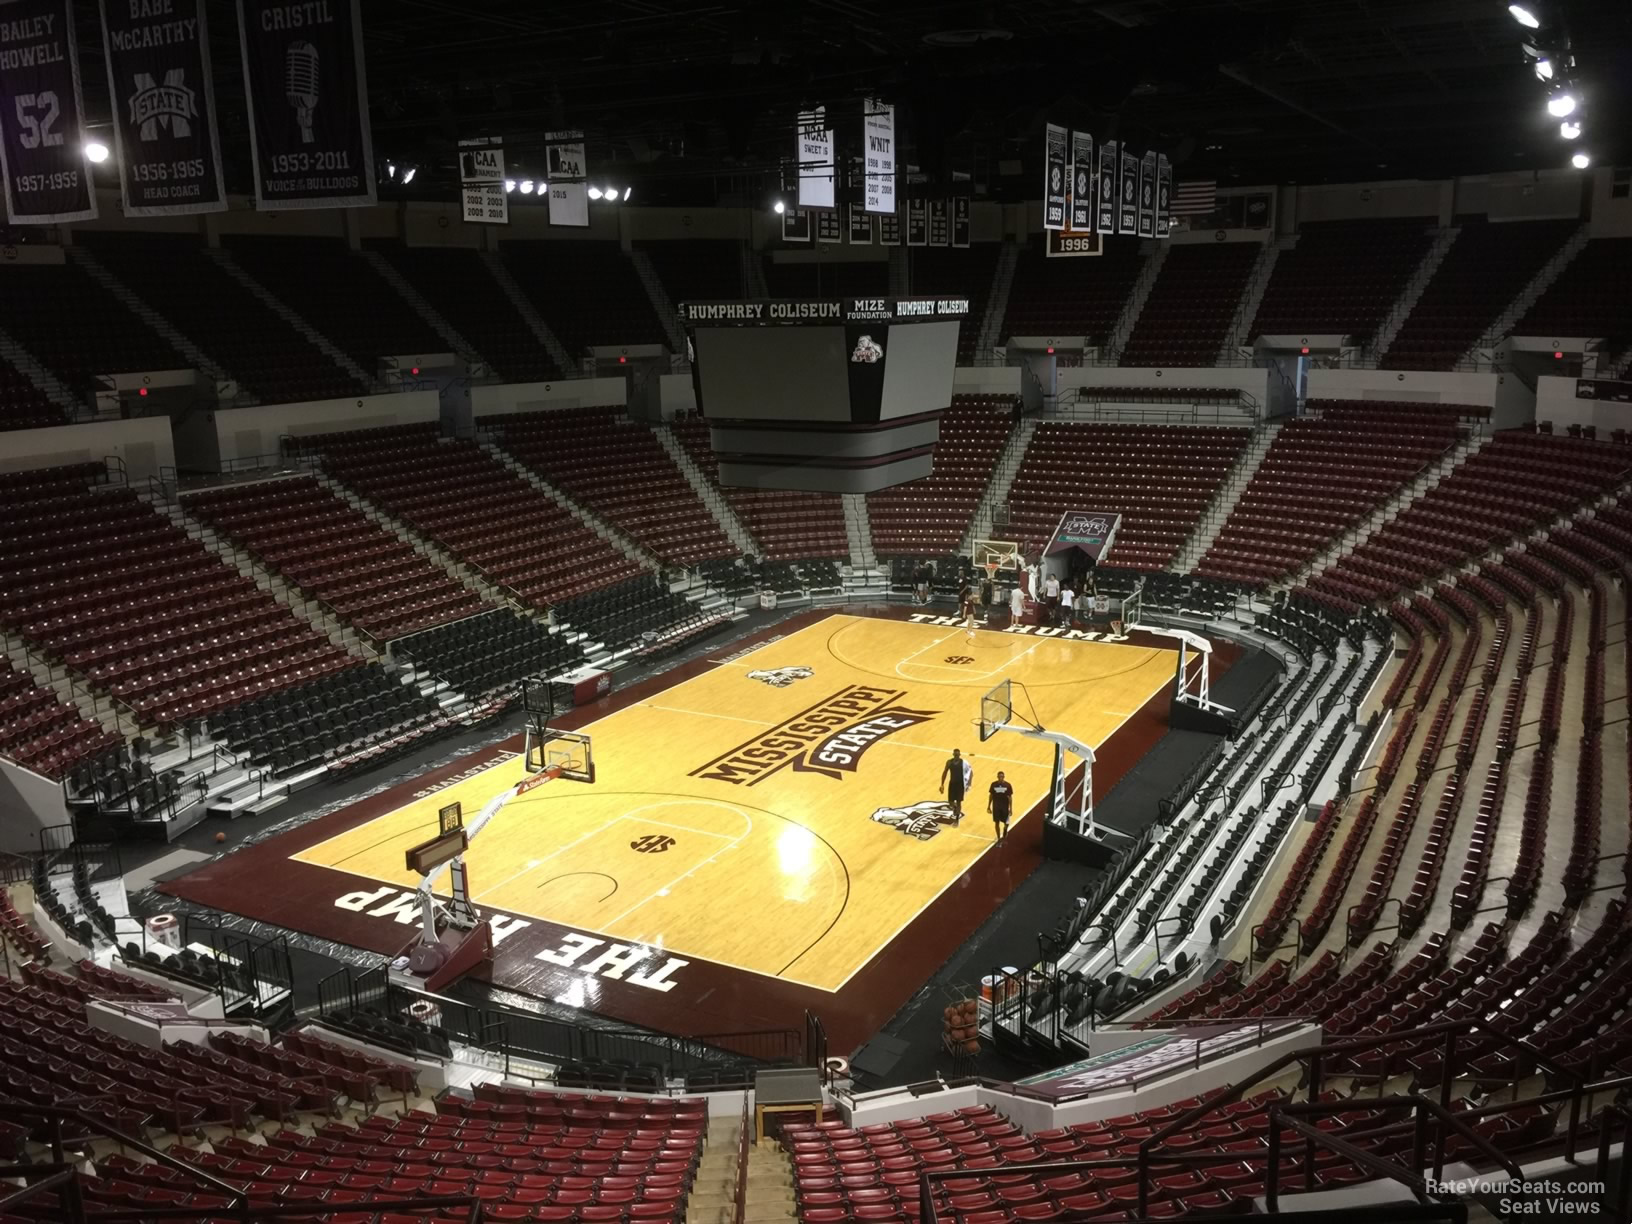 section 216, row 8 seat view  - humphrey coliseum